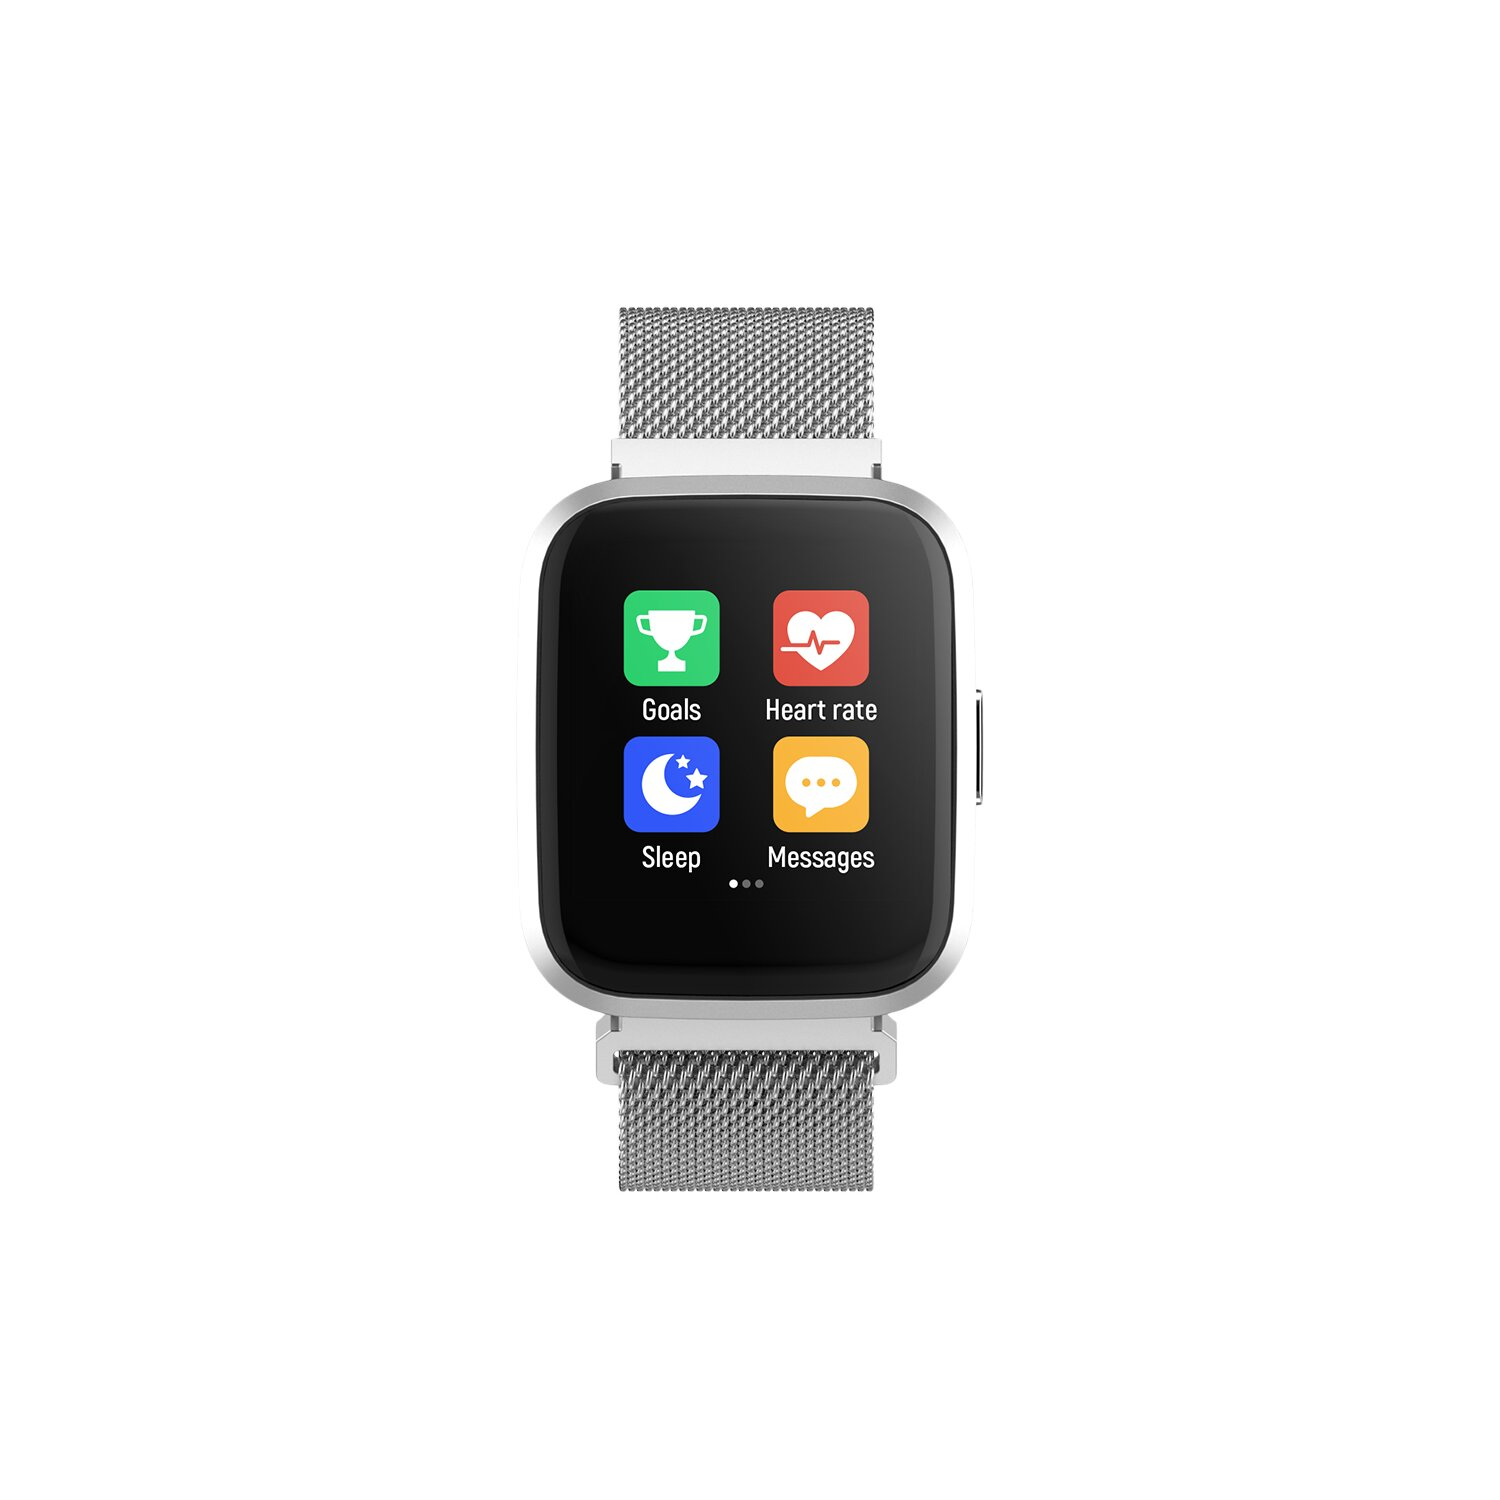 SW-310 Smartwatch Silber FOREVER Universal,